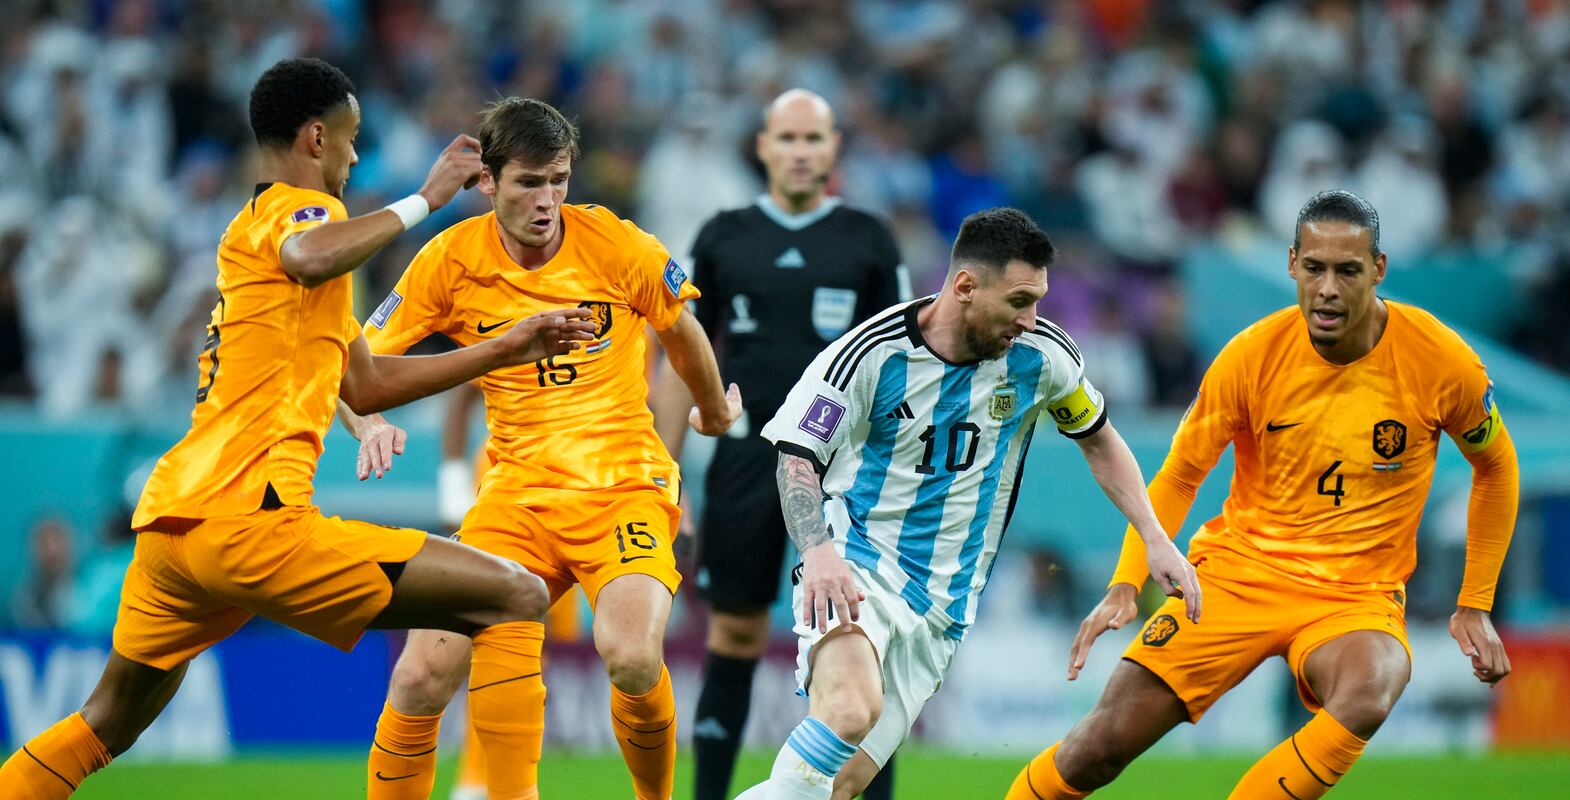 Argentina's Lionel Messi, second right, vies for the ball with Netherlands' defenders during the World Cup quarterfinal soccer match between the Netherlands and Argentina, at the Lusail Stadium in Lusail, Qatar, Friday, Dec.  9, 2022.  (AP Photo / Francisco Seco)